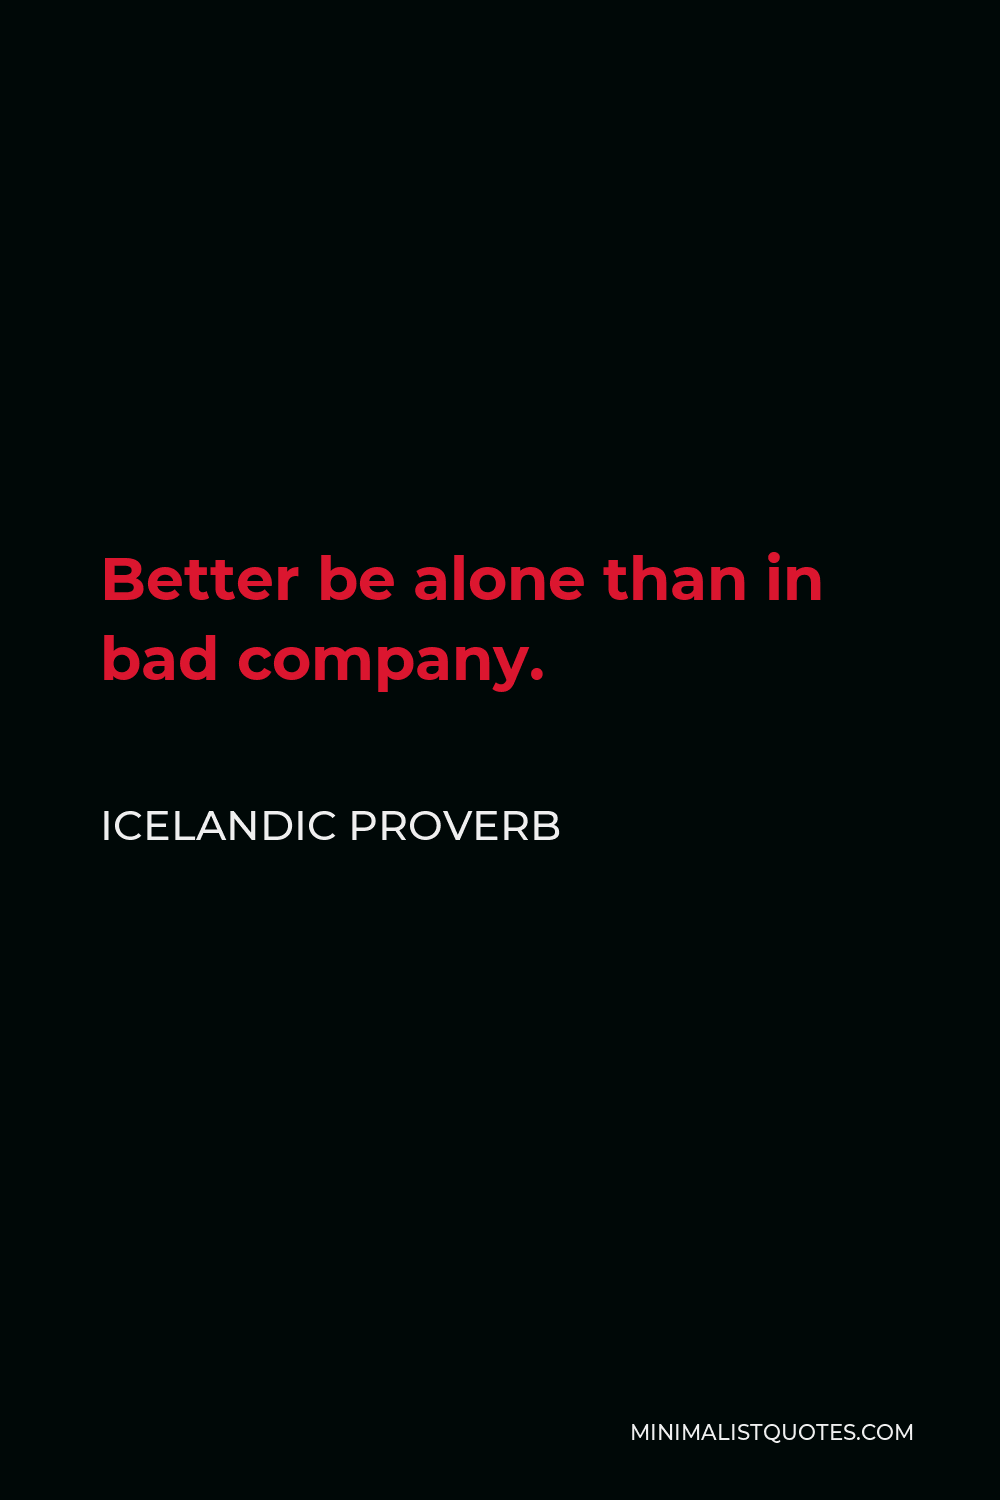 Icelandic Proverb Quote - Better be alone than in bad company.